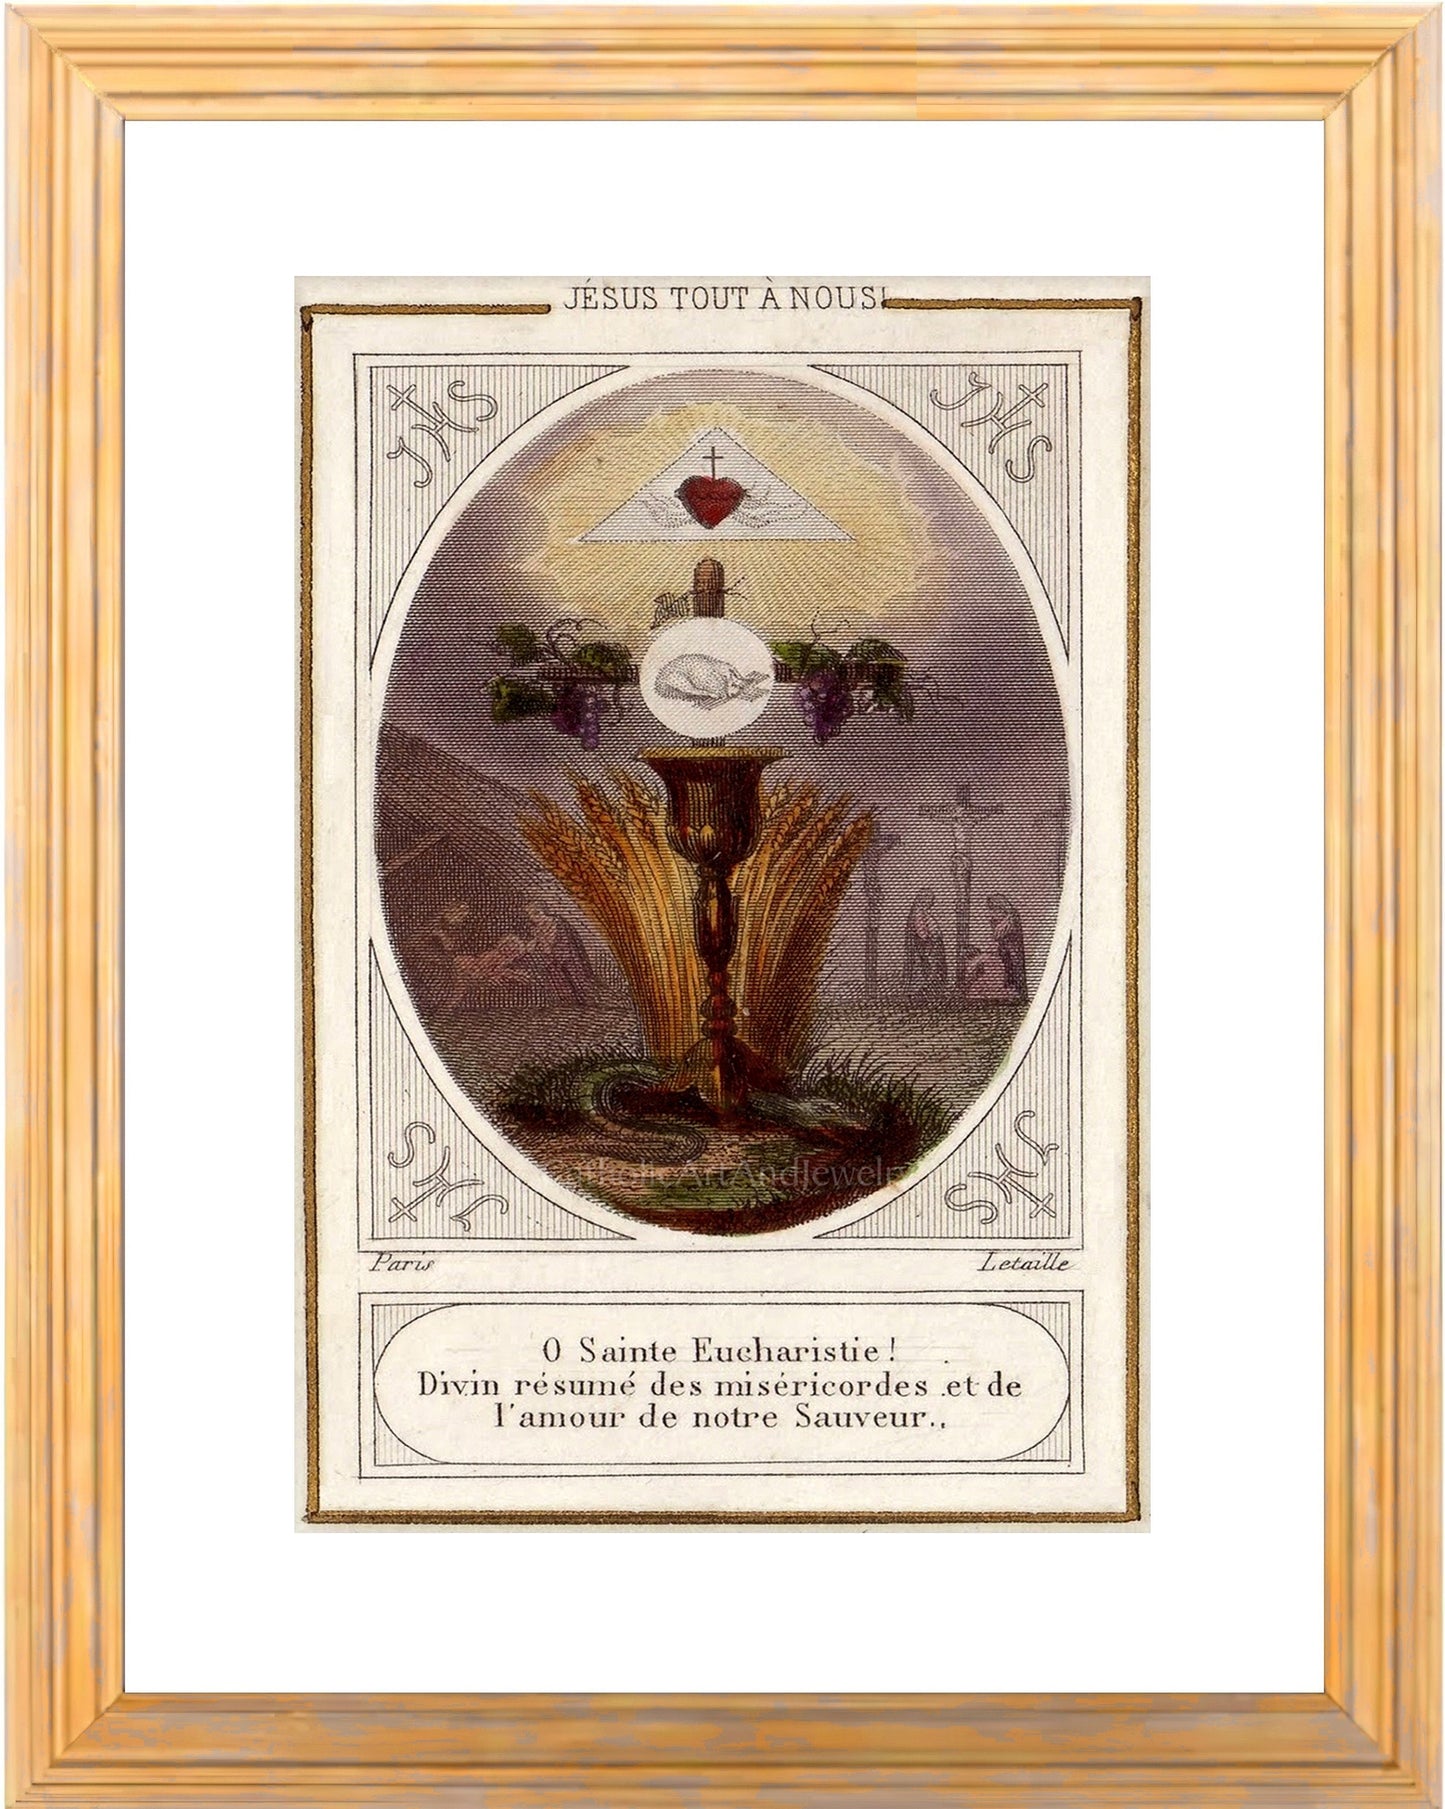 O Holy Eucharist! –8.5x11" – Based on Vintage Holy Card – Unique First Communion Gift – PERSONALIZED – Archival Quality